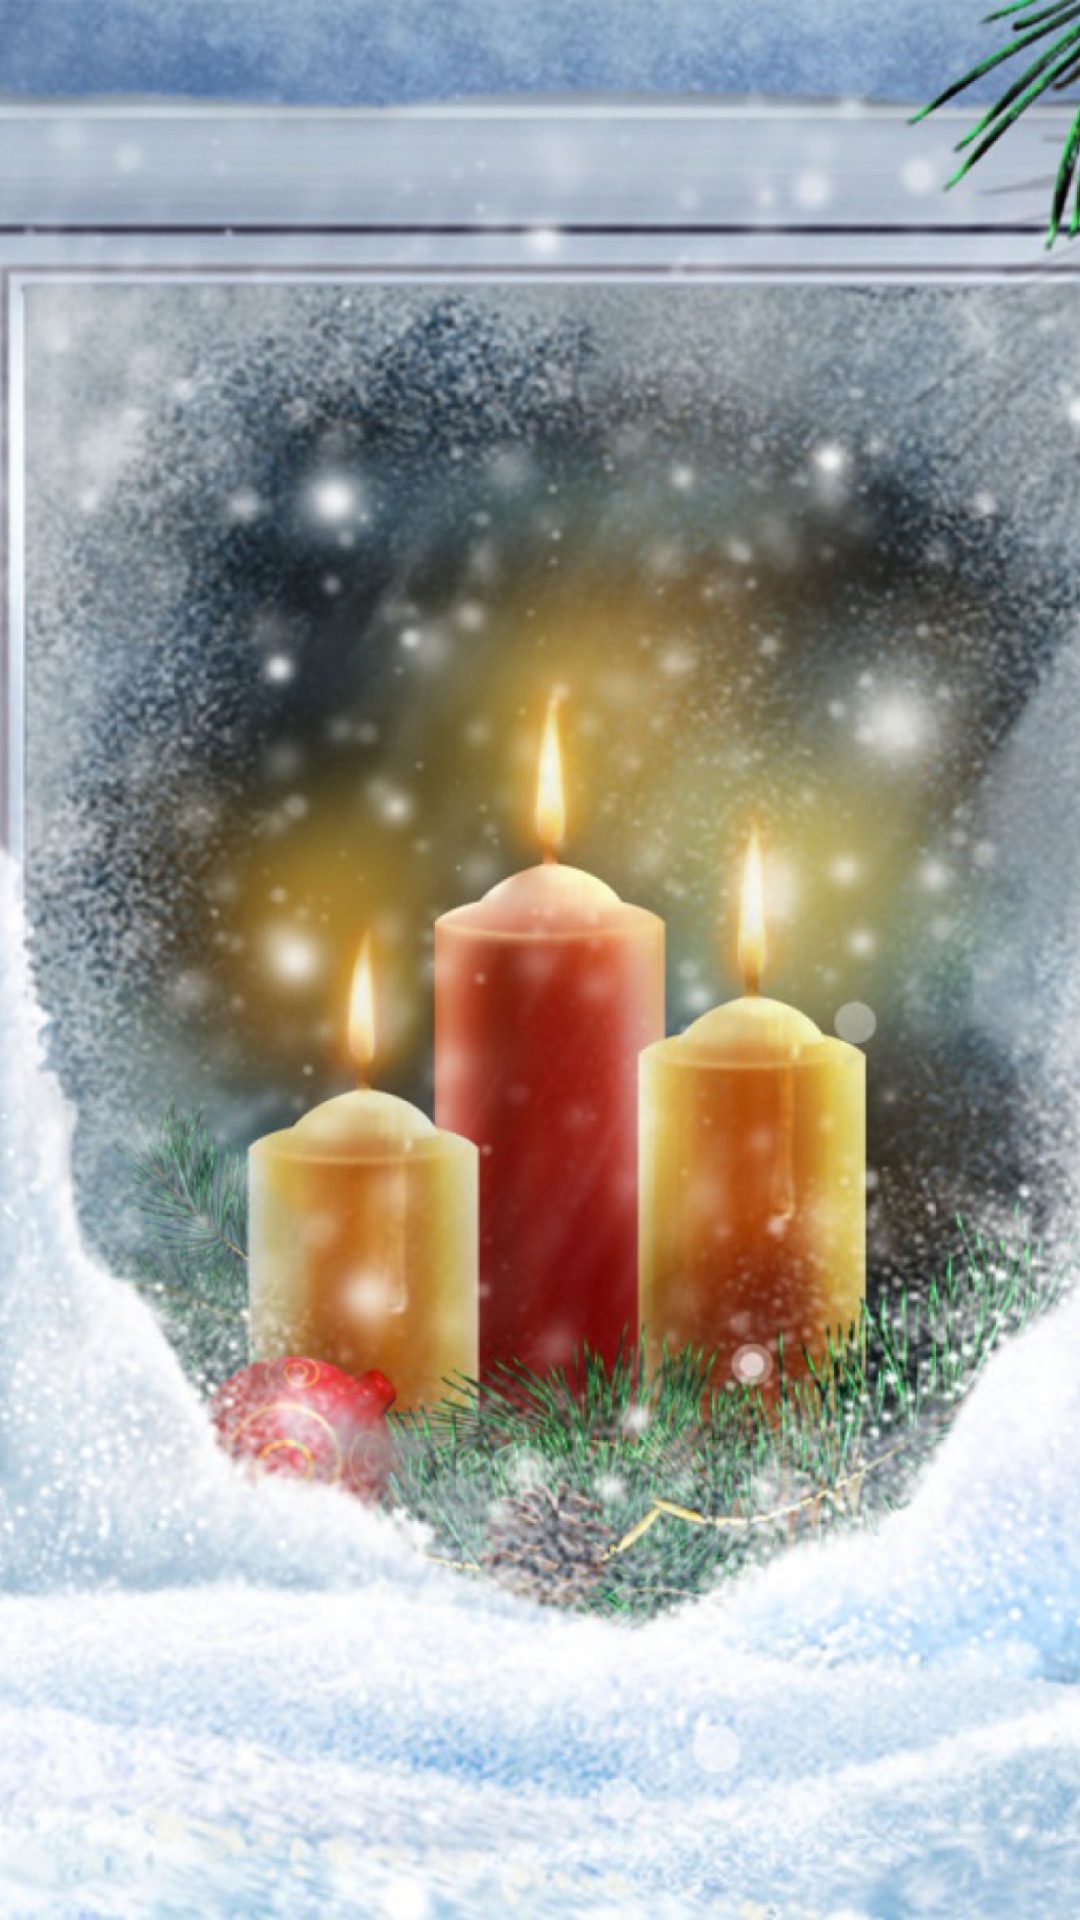 Special Wishes At Christmas wallpaper 1080x1920